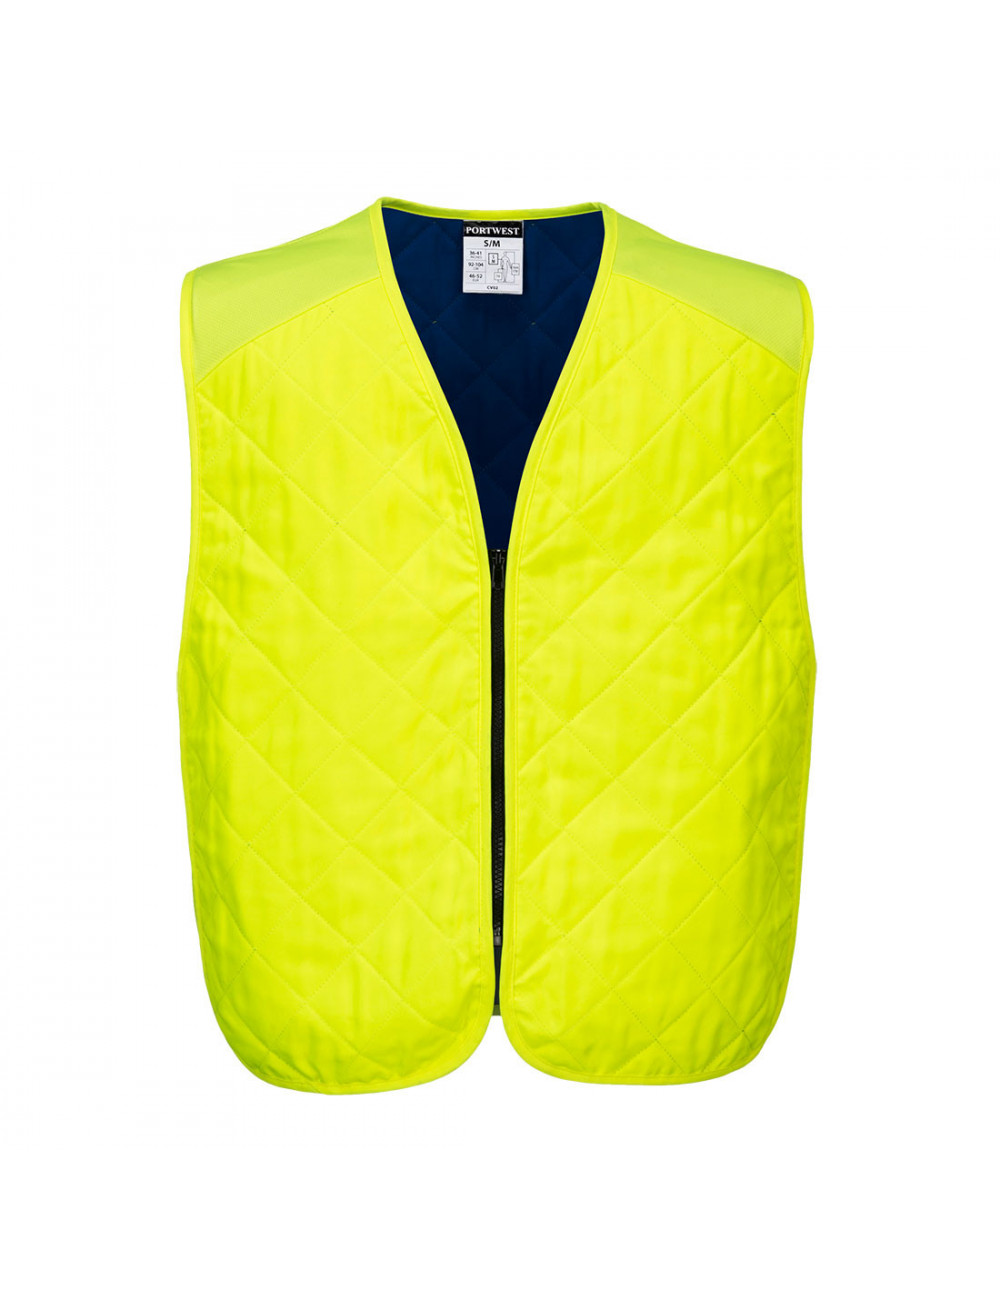 Cooling vest yellow Portwest